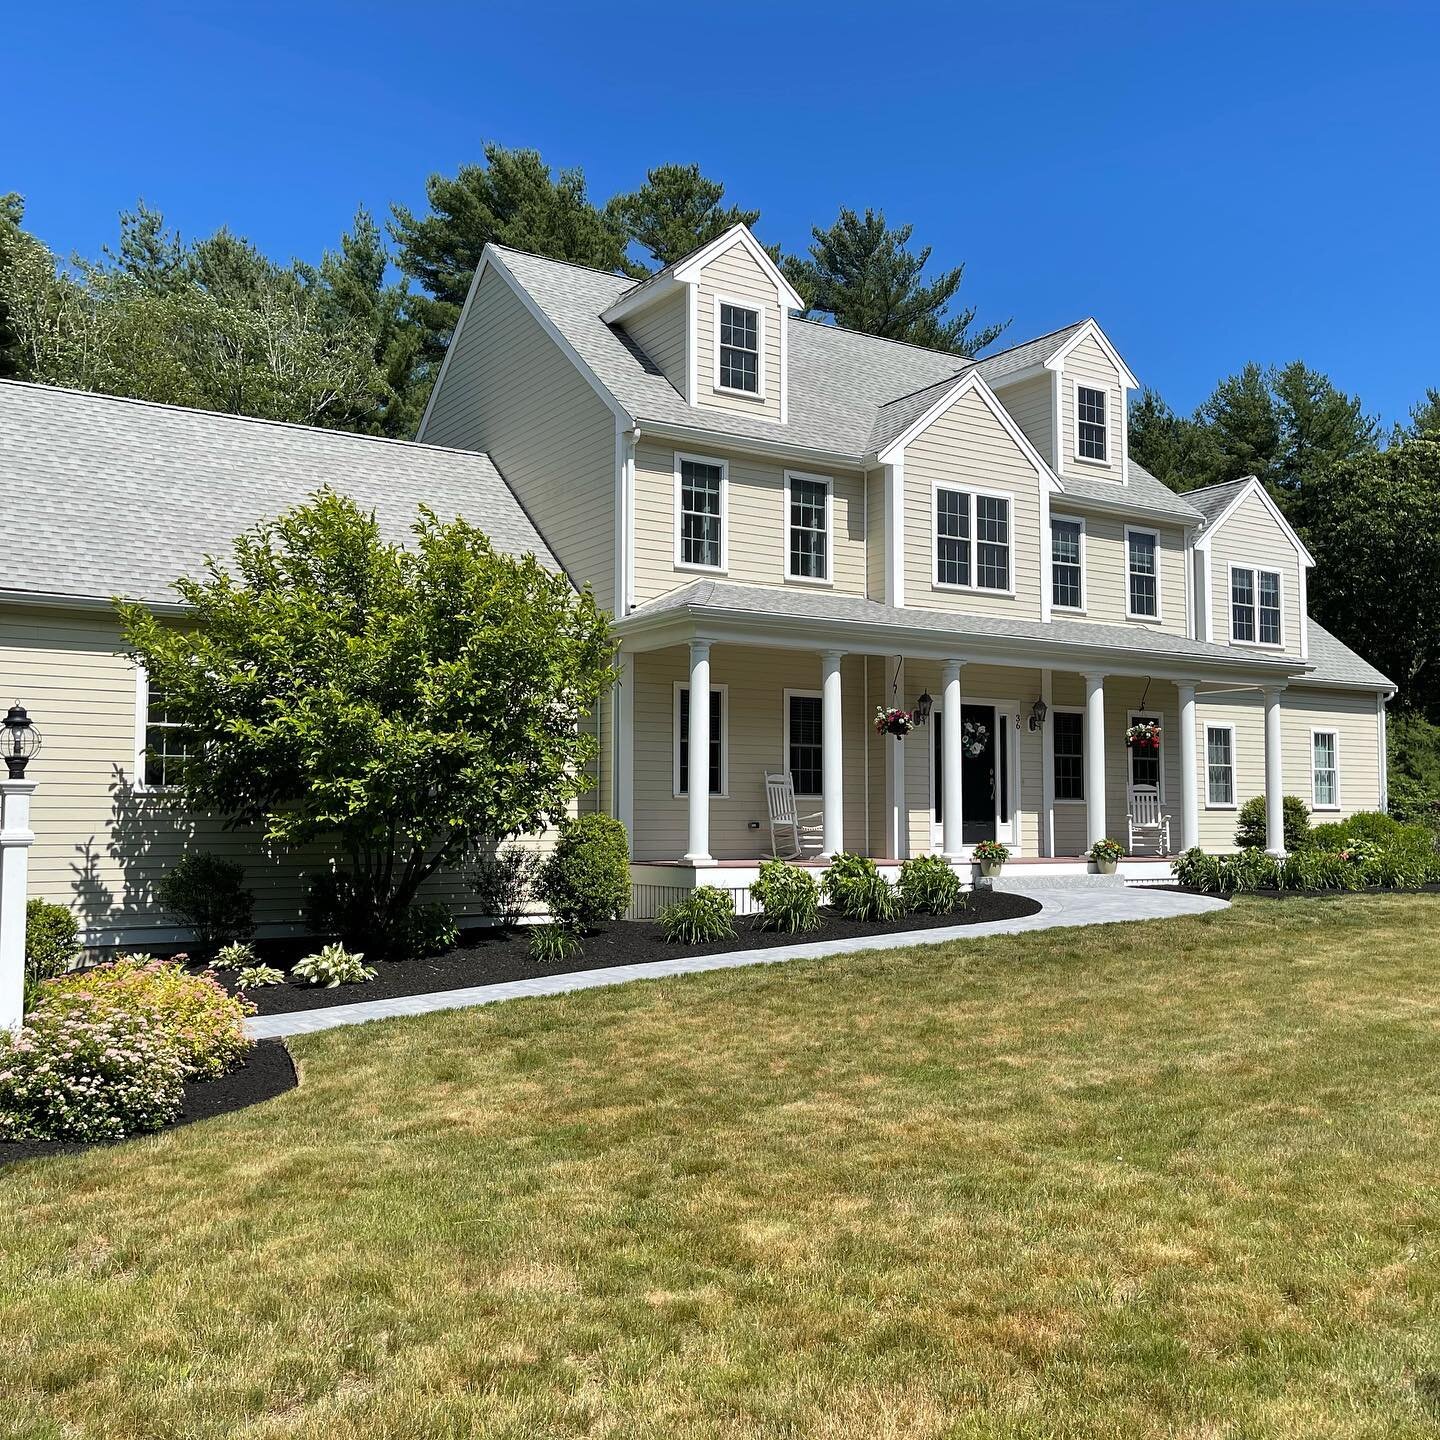 COMING SOON! Absolutely mint 2010 4BR 2.5 Bath Colonial in Hanover on Sunset Point. Showings start next Friday. I will post photos and 3-D Matterport tour here prior to listing. $950,000